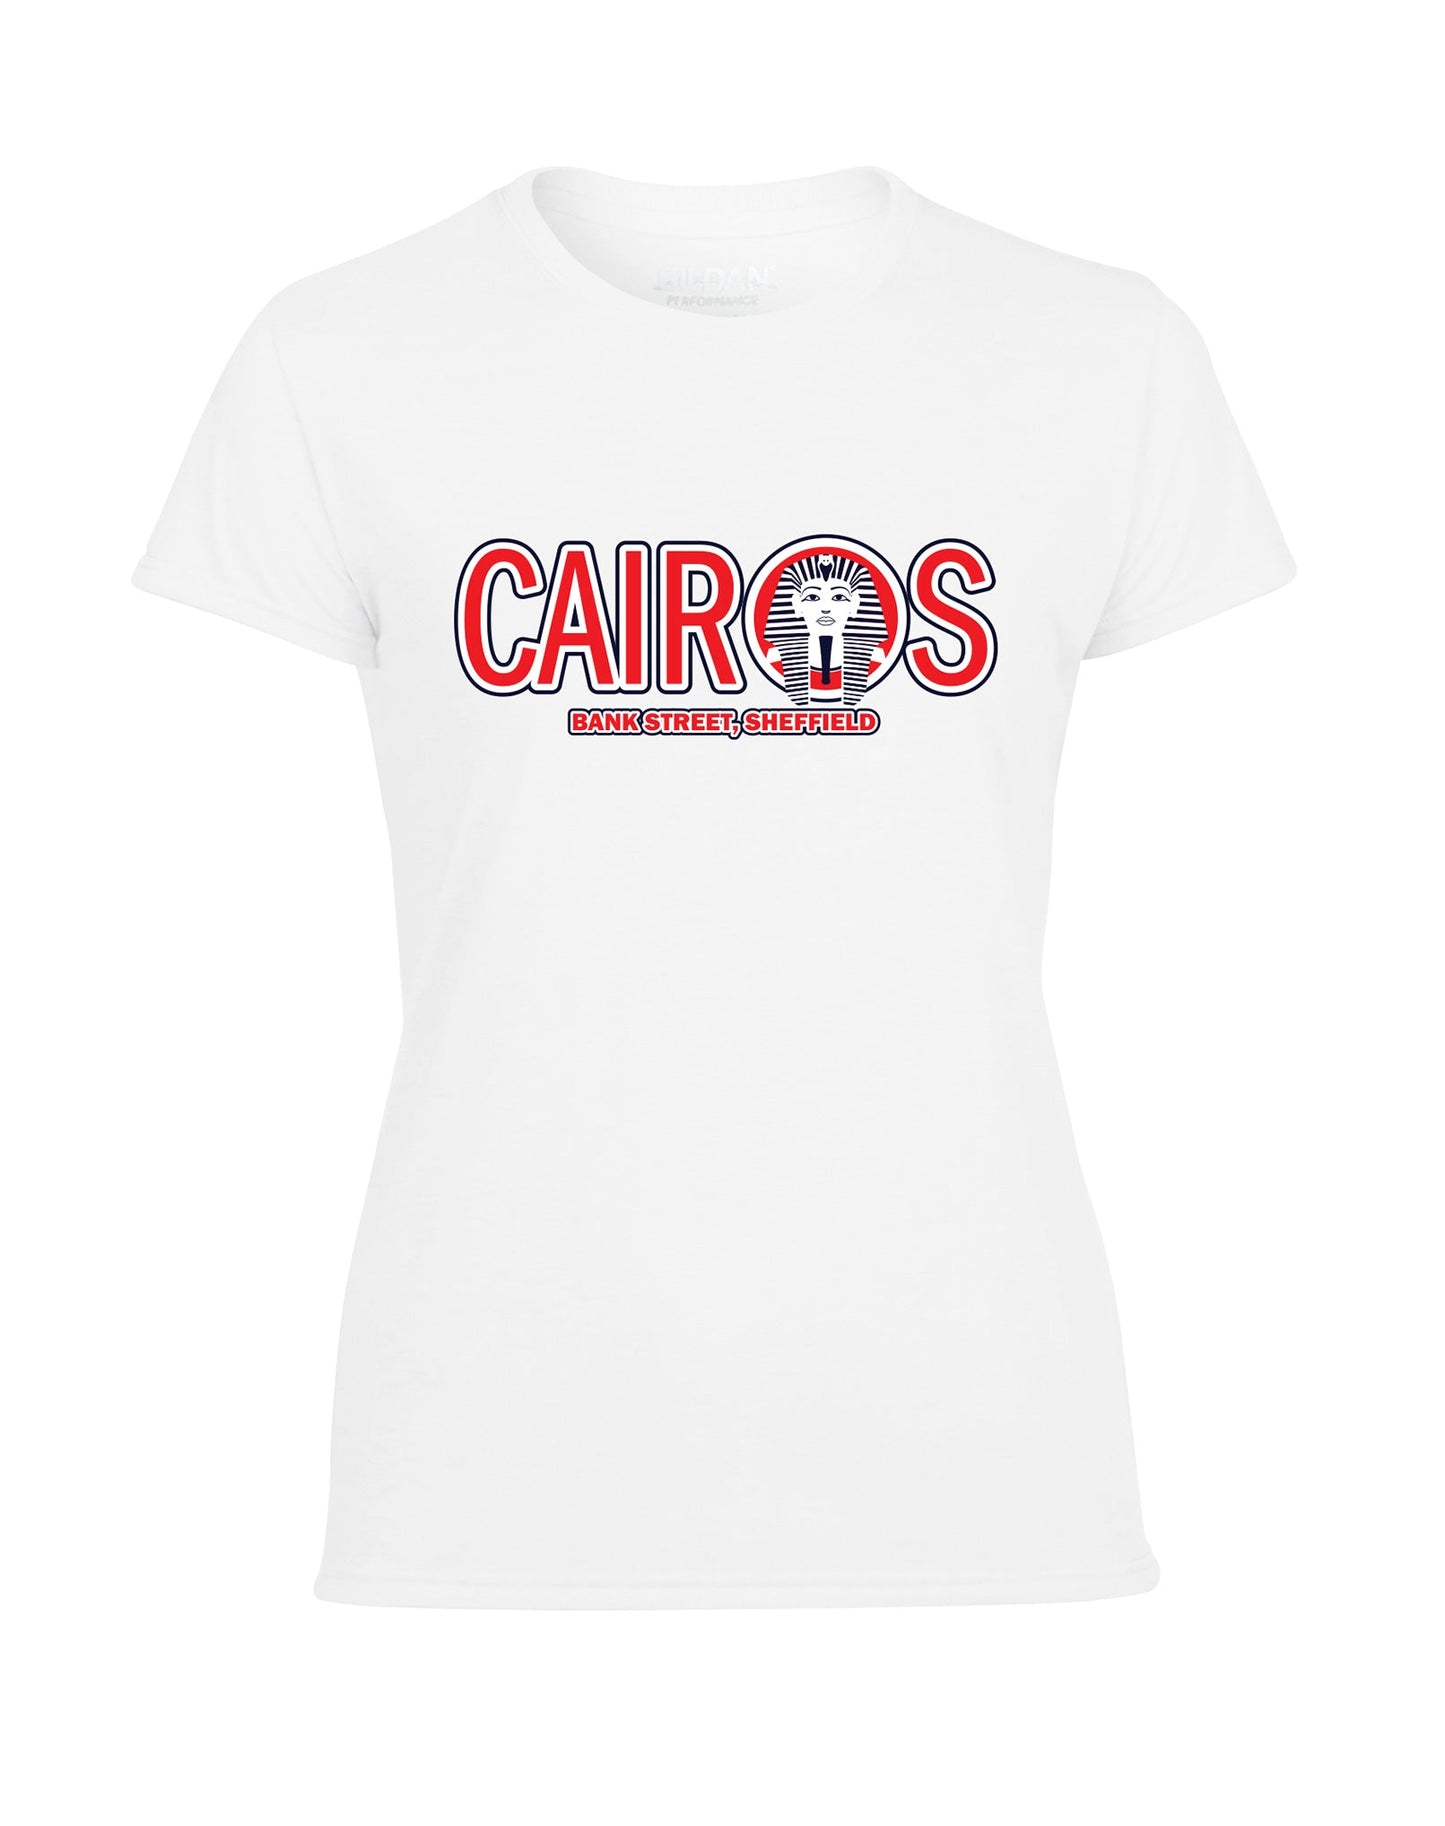 Cairos ladies fit t-shirt- various colours - Dirty Stop Outs